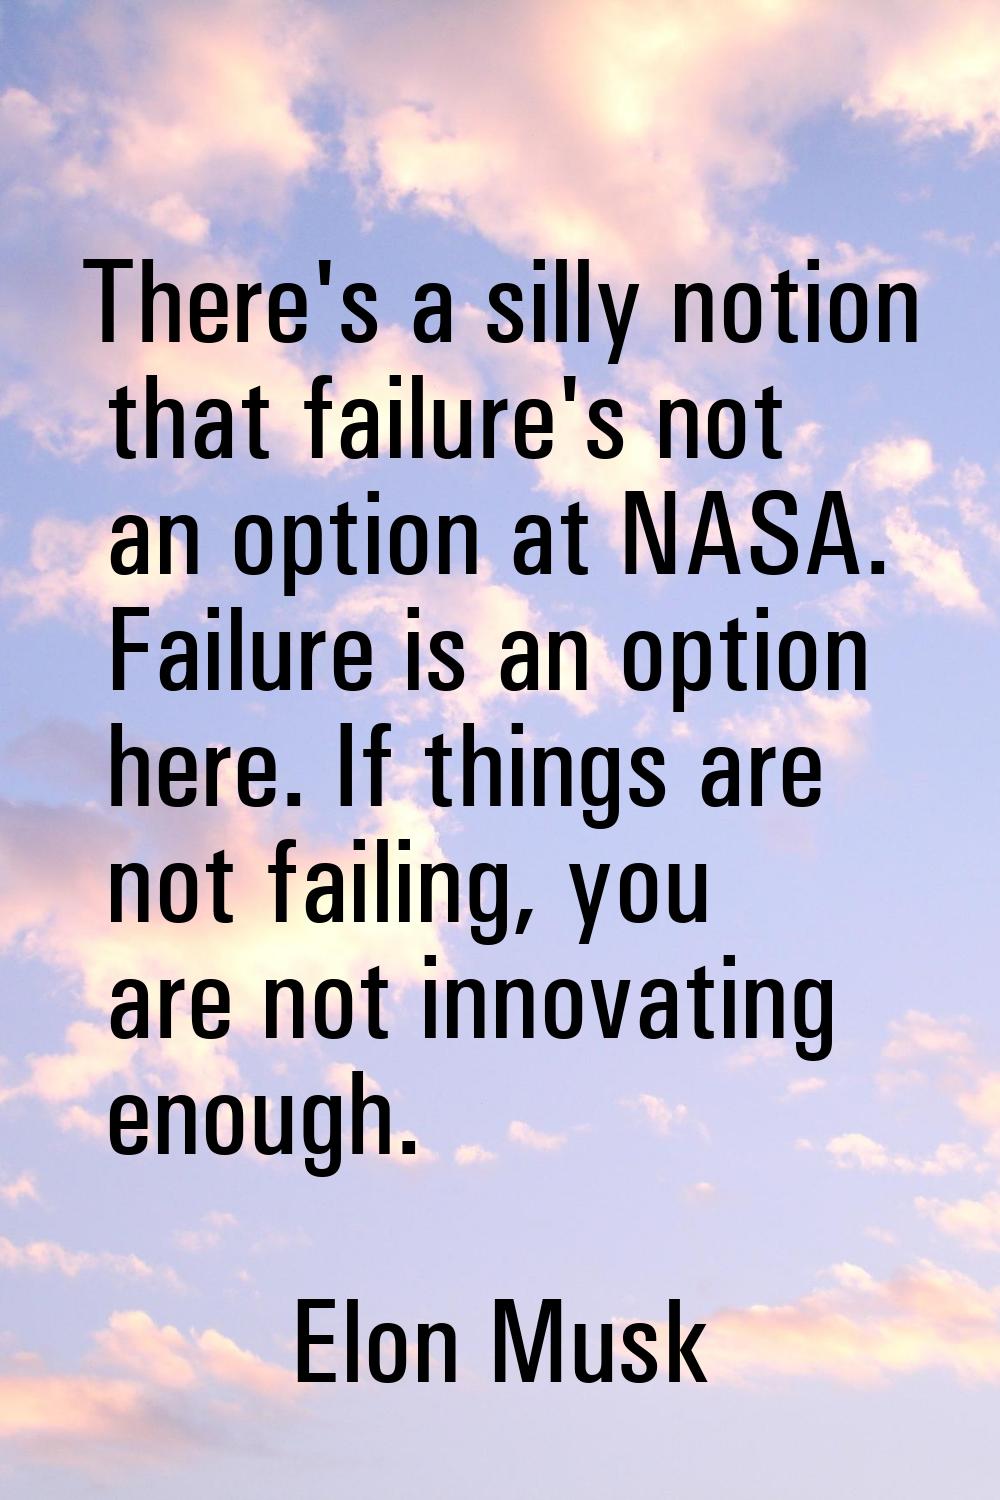 There's a silly notion that failure's not an option at NASA. Failure is an option here. If things a